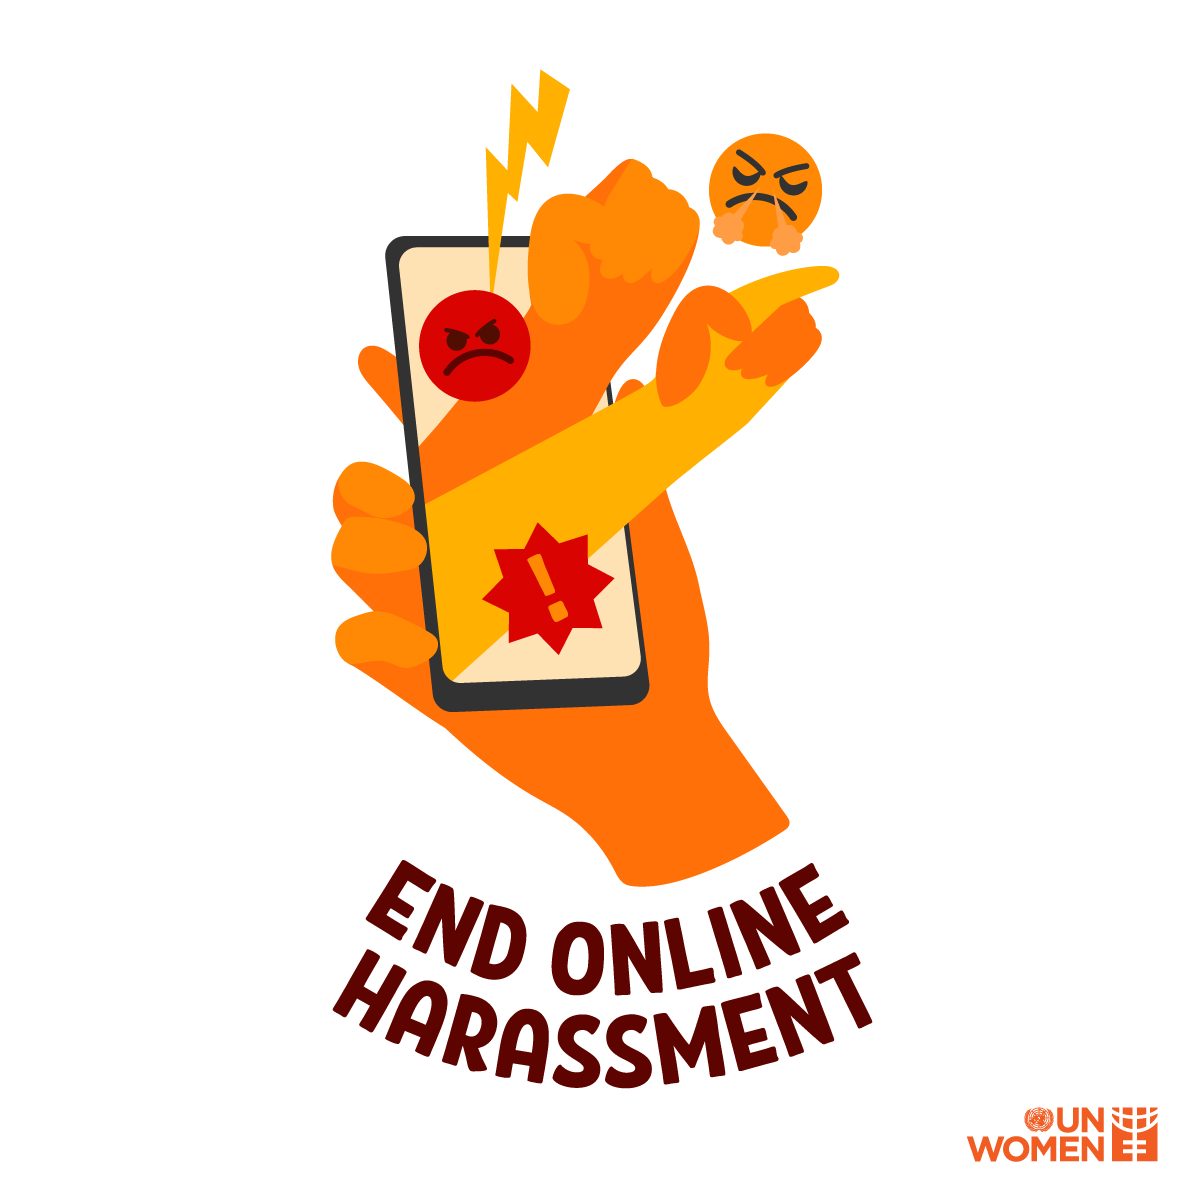 With an increase in Internet use during #COVID19, women and girls have become targets of online violence more than ever. 
#OrangeTheWorld by using social media to spread awareness & kindness.